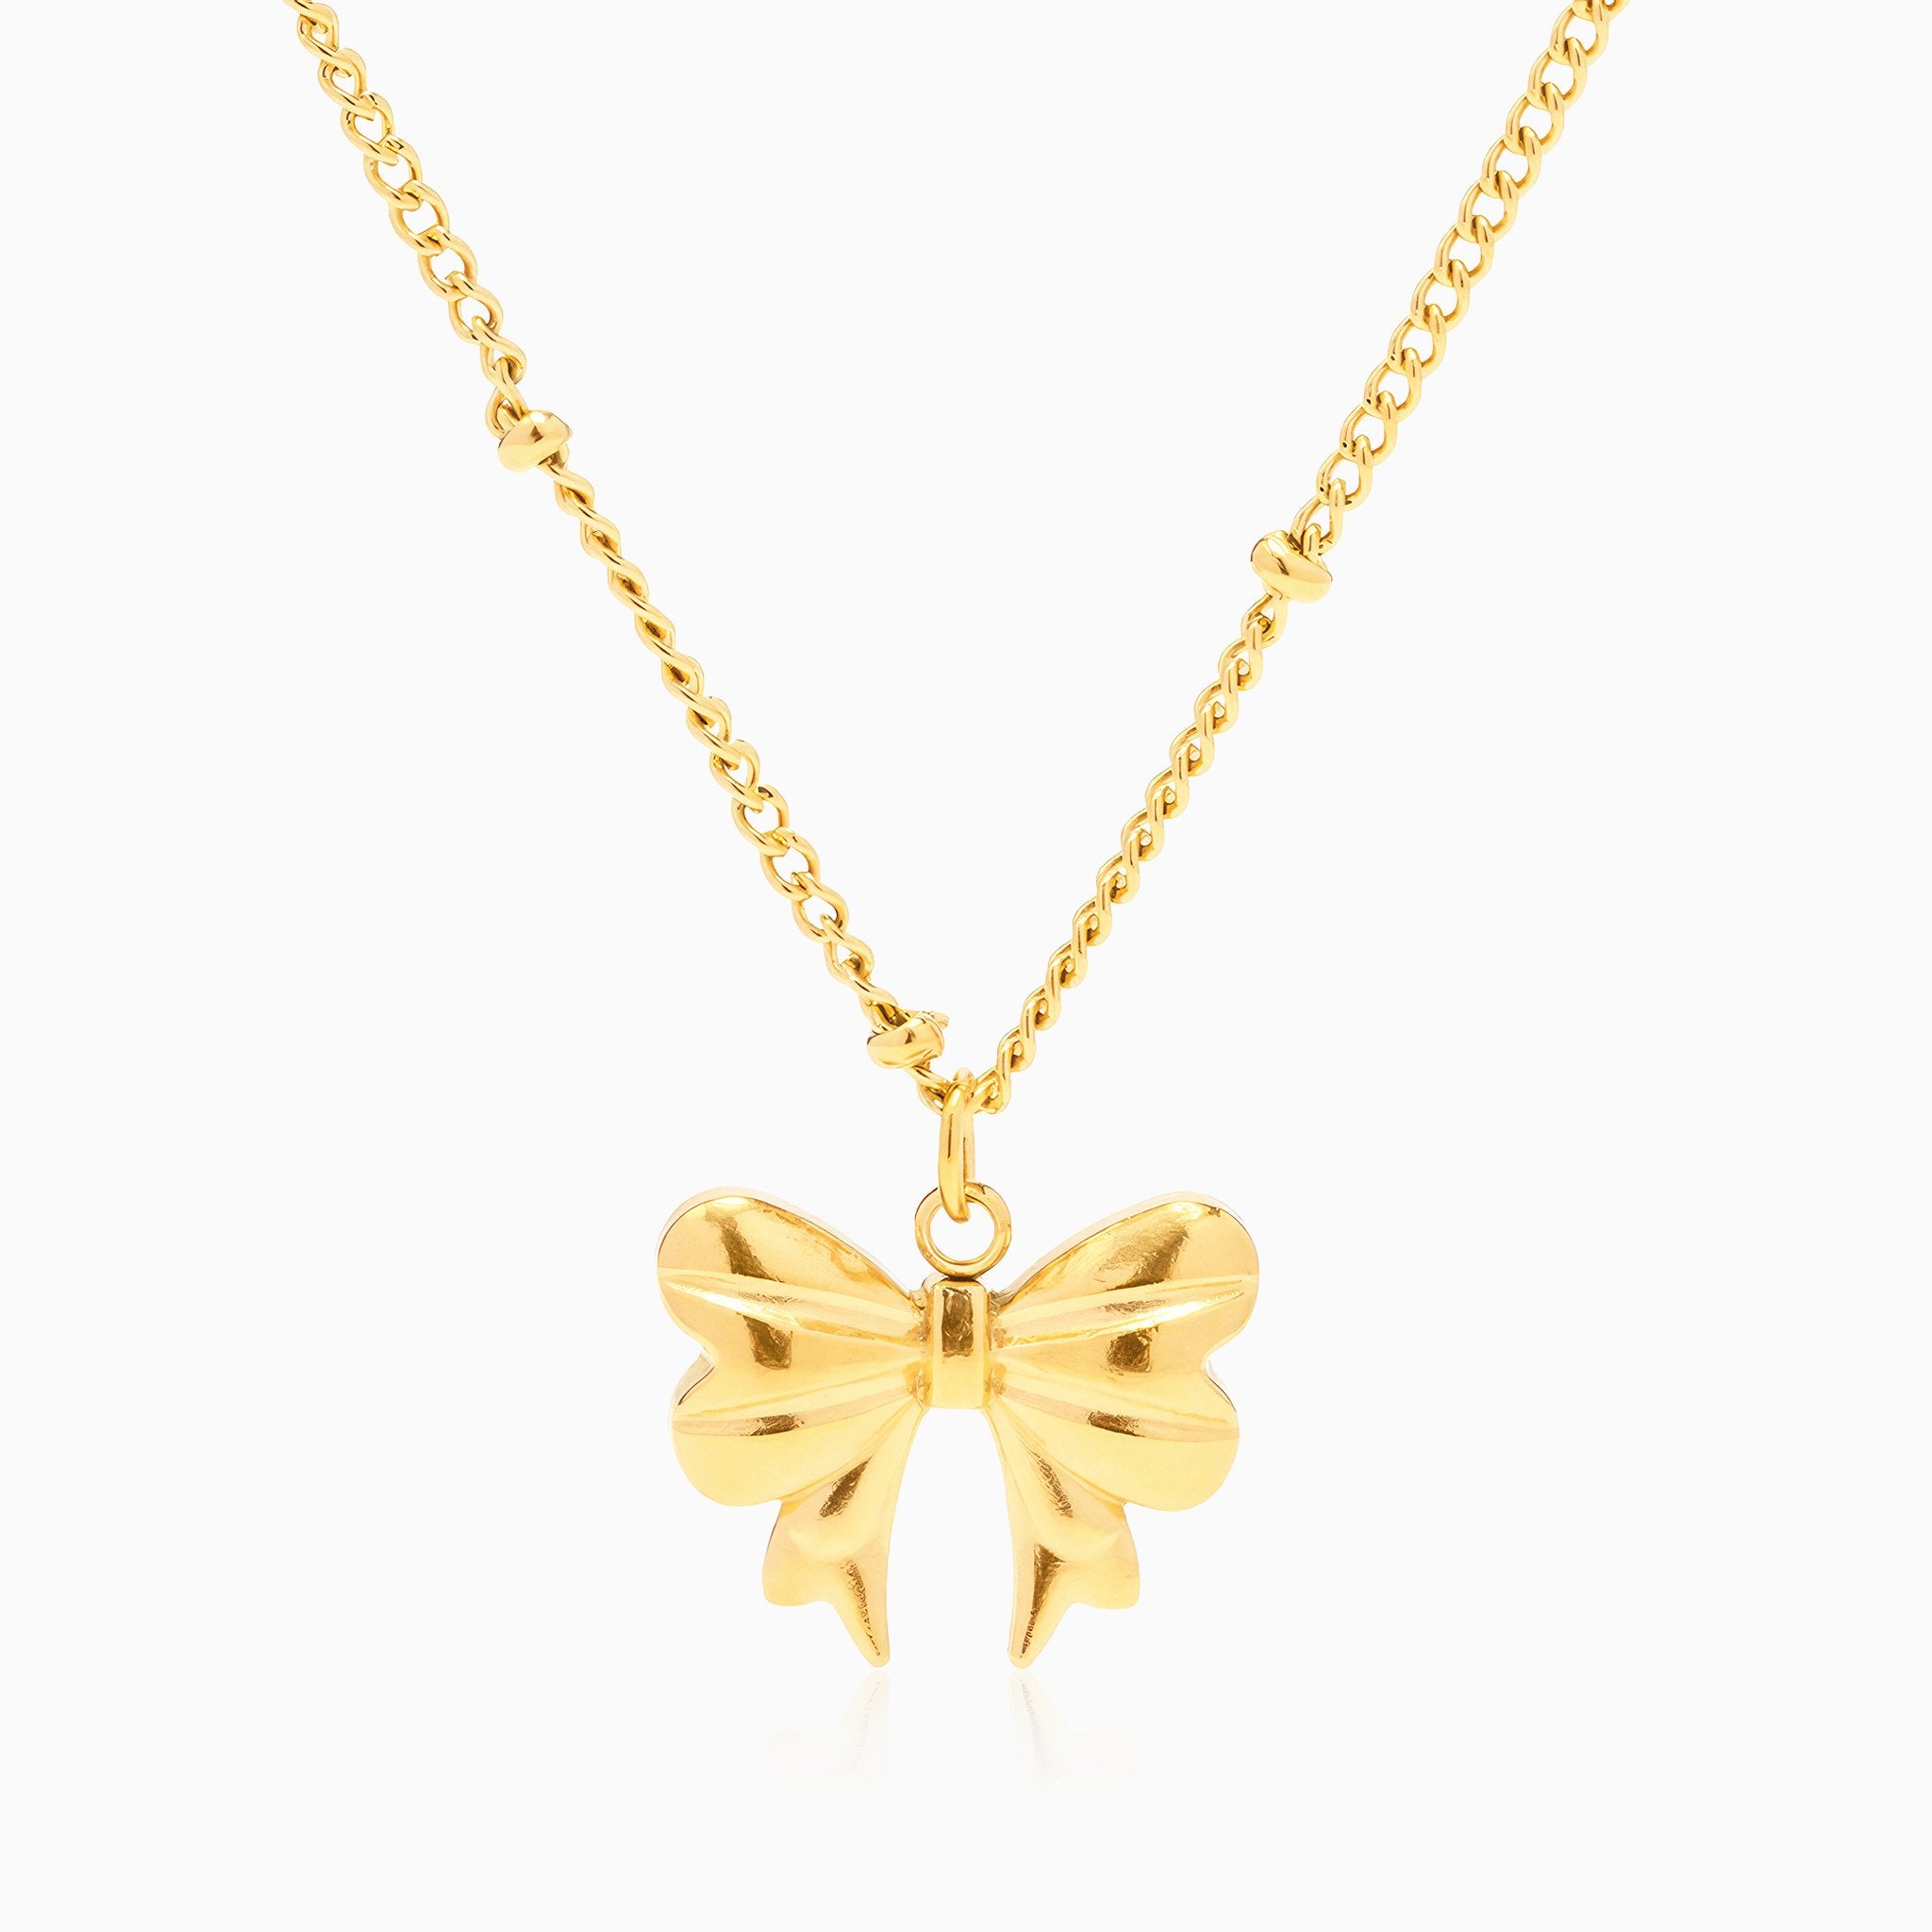 Bead Chain Butterfly Pendant Necklace - Nobbier - Necklace - 18K Gold And Titanium PVD Coated Jewelry